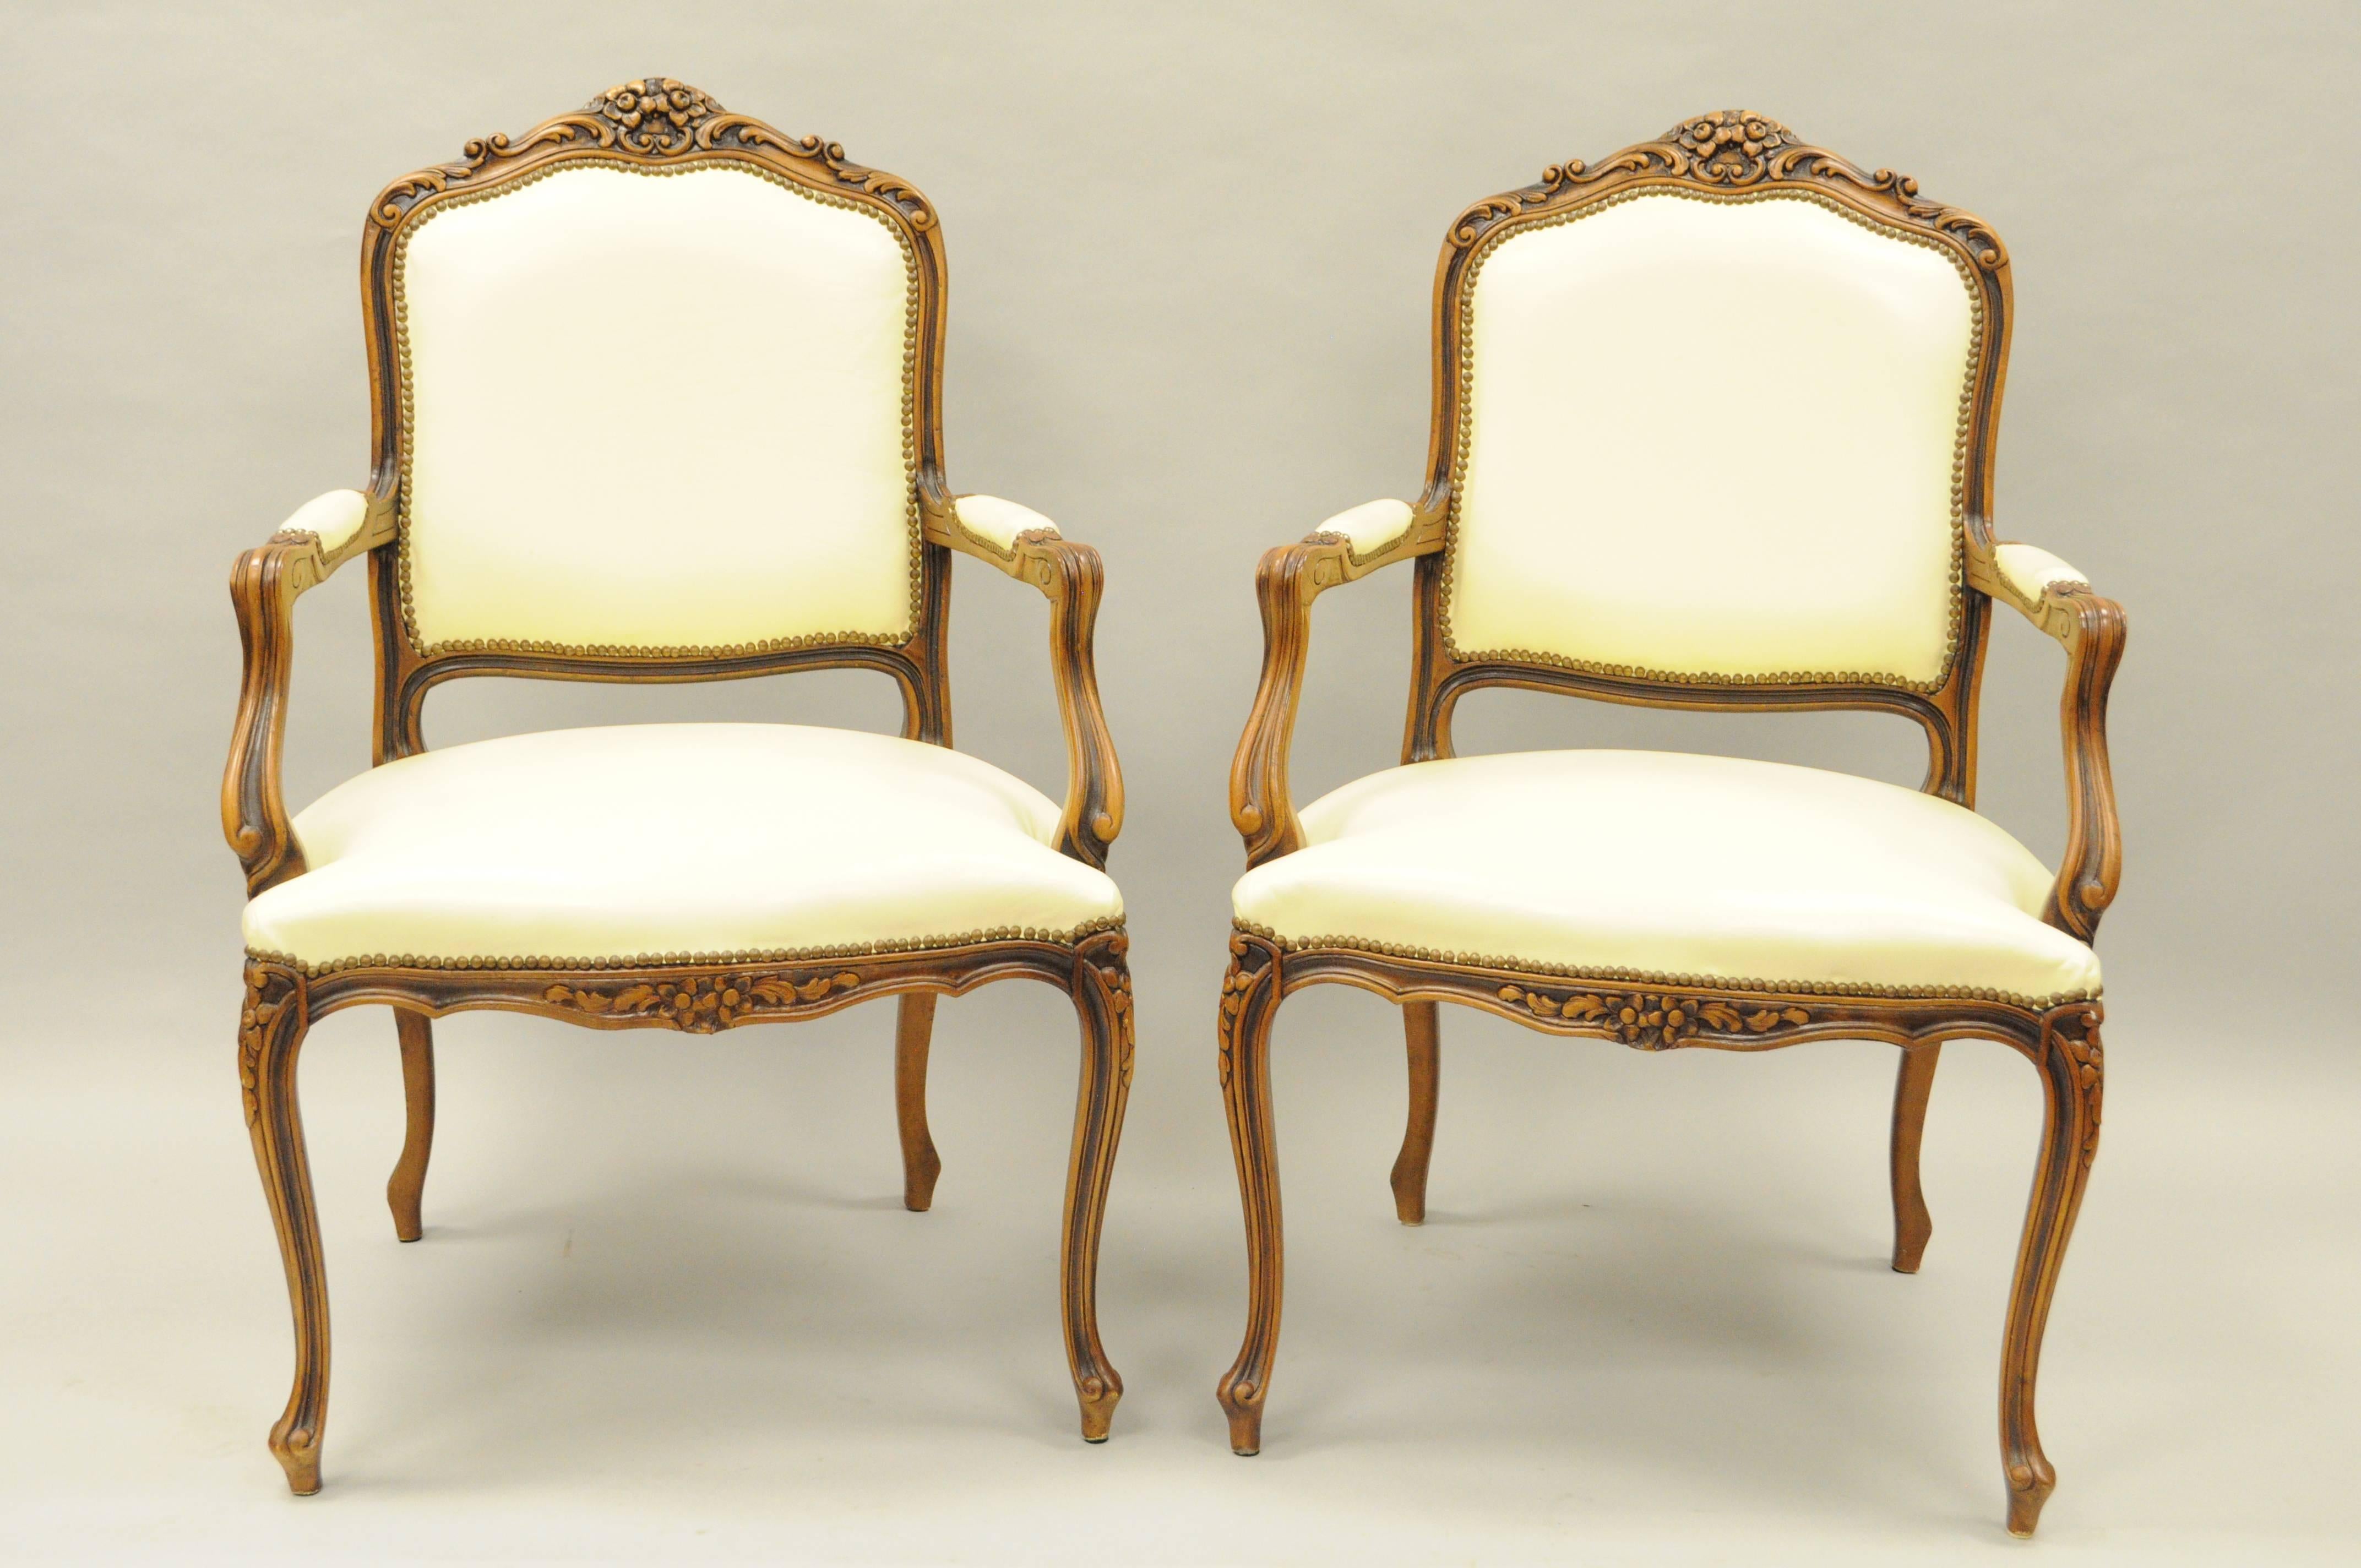 Pair of vintage Italian carved walnut French country or Louis XV style armchairs by Chateau d'Ax spa. Chairs feature cream colored leather upholstery, finely carved solid wood frames, upholstered armrests, nailhead trim, cabriole legs, and floral